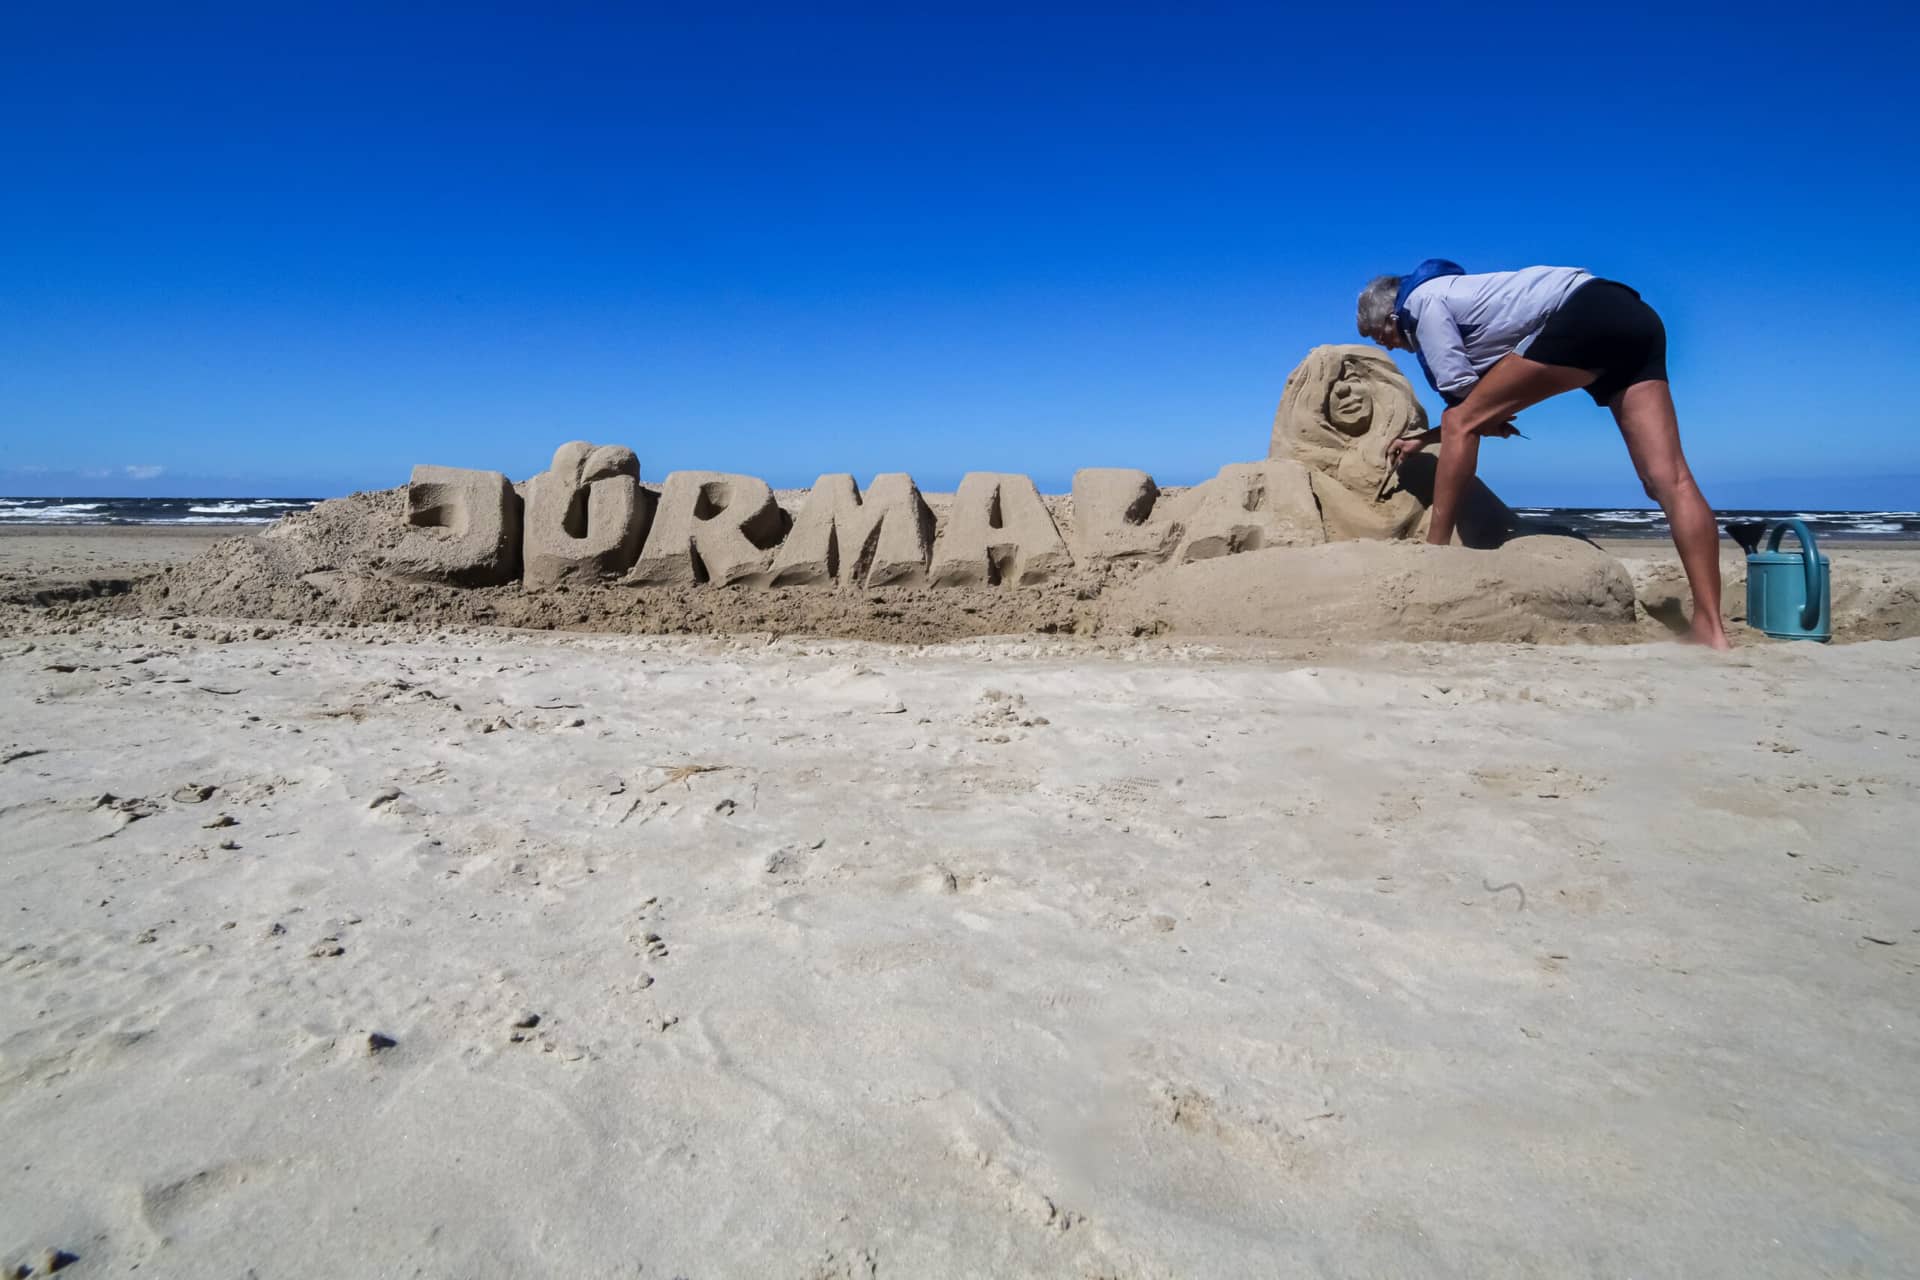 A person making sculpture of sand, sign Jurmala made of sand